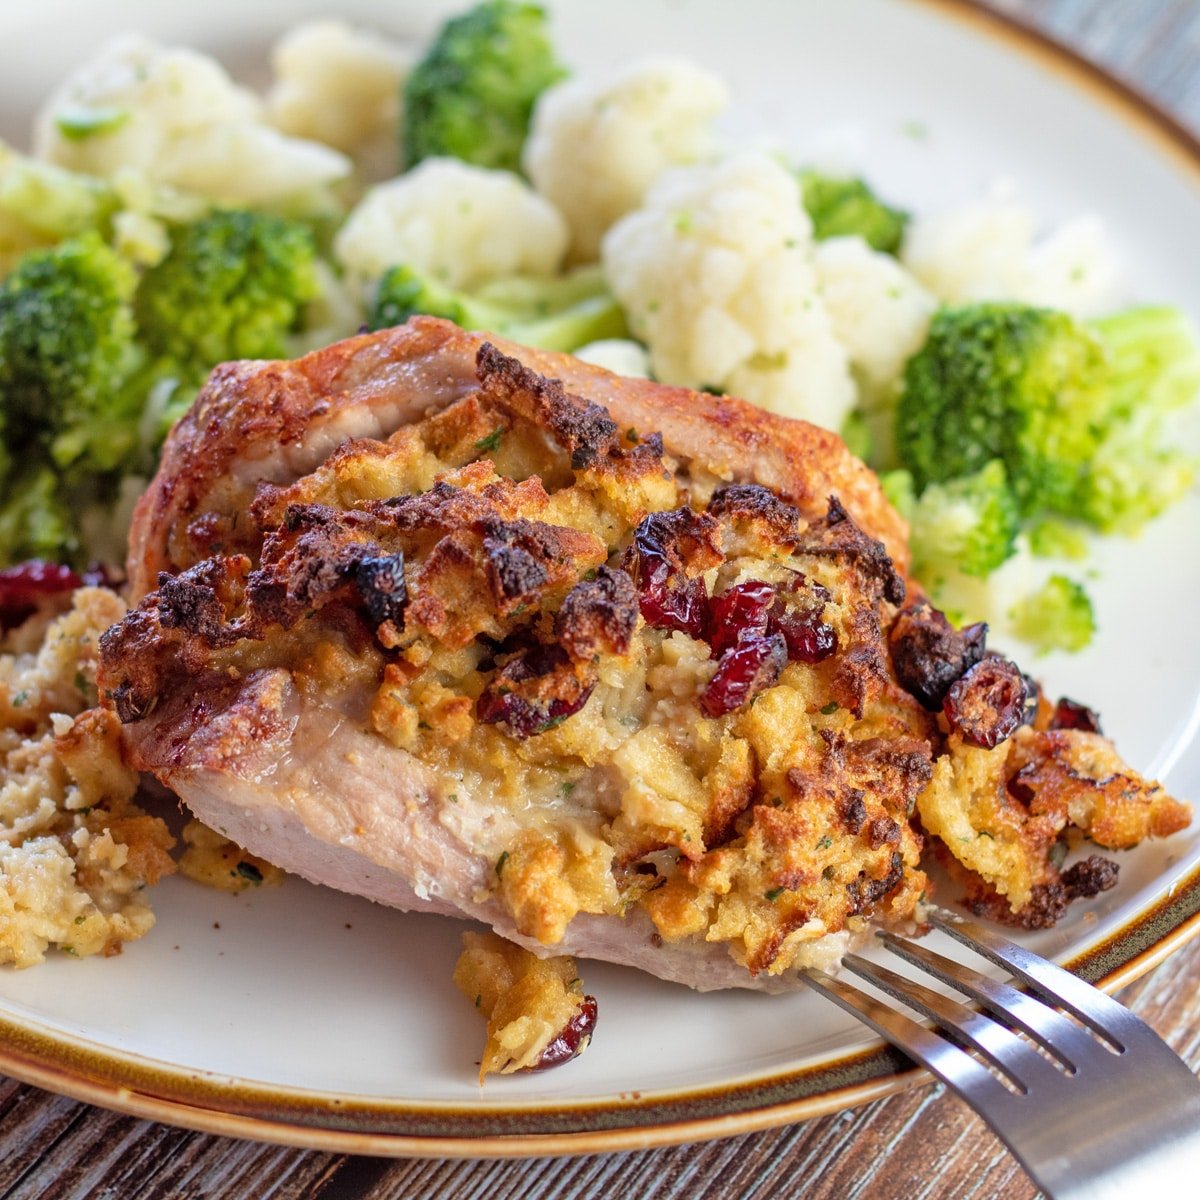 Make incredible stuffed pork chops in half the time with your air fryer!